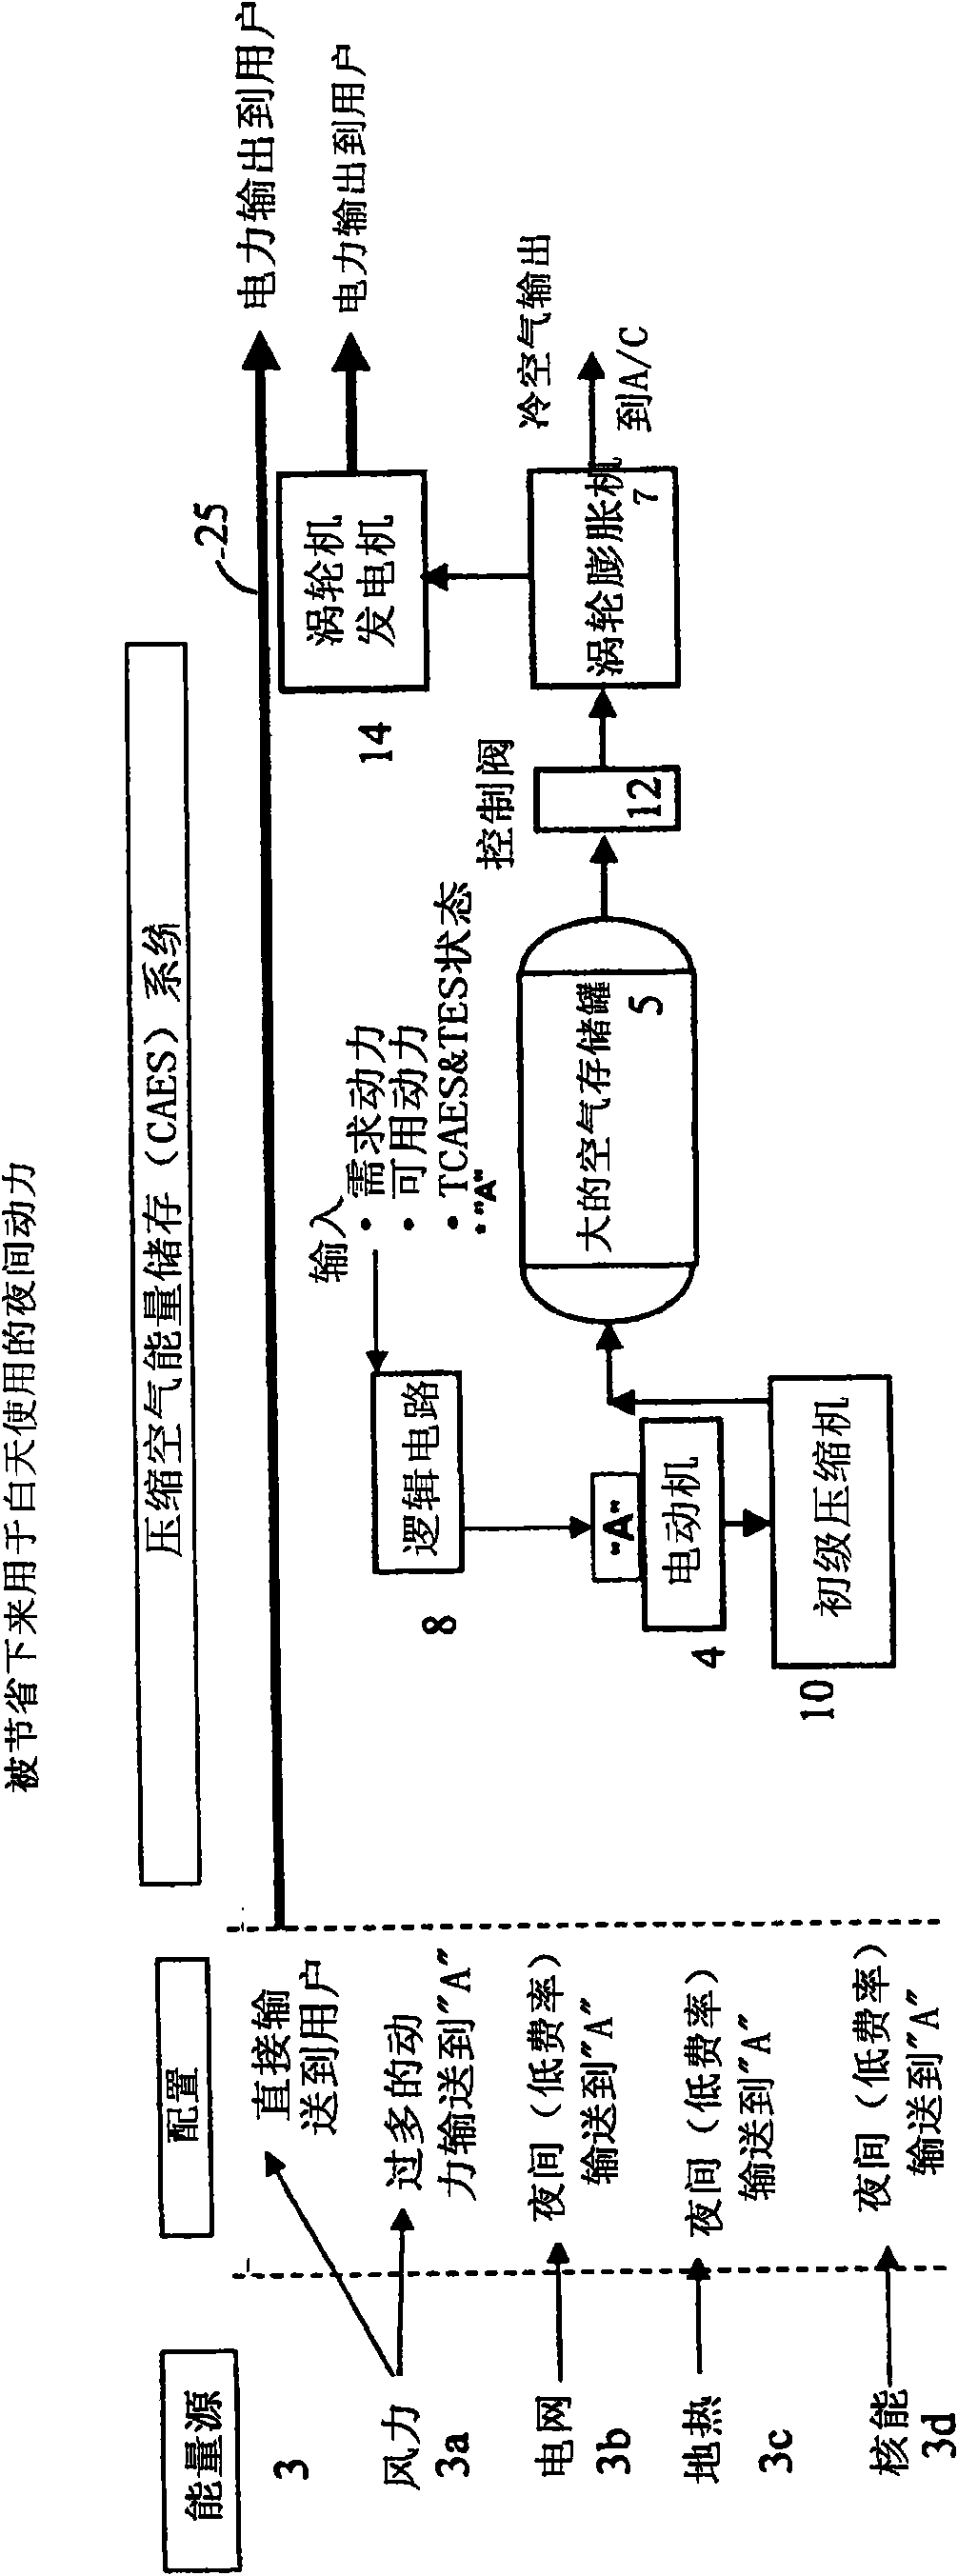 Thermal energy storage system using compressed air energy and/or chilled water from desalination processes